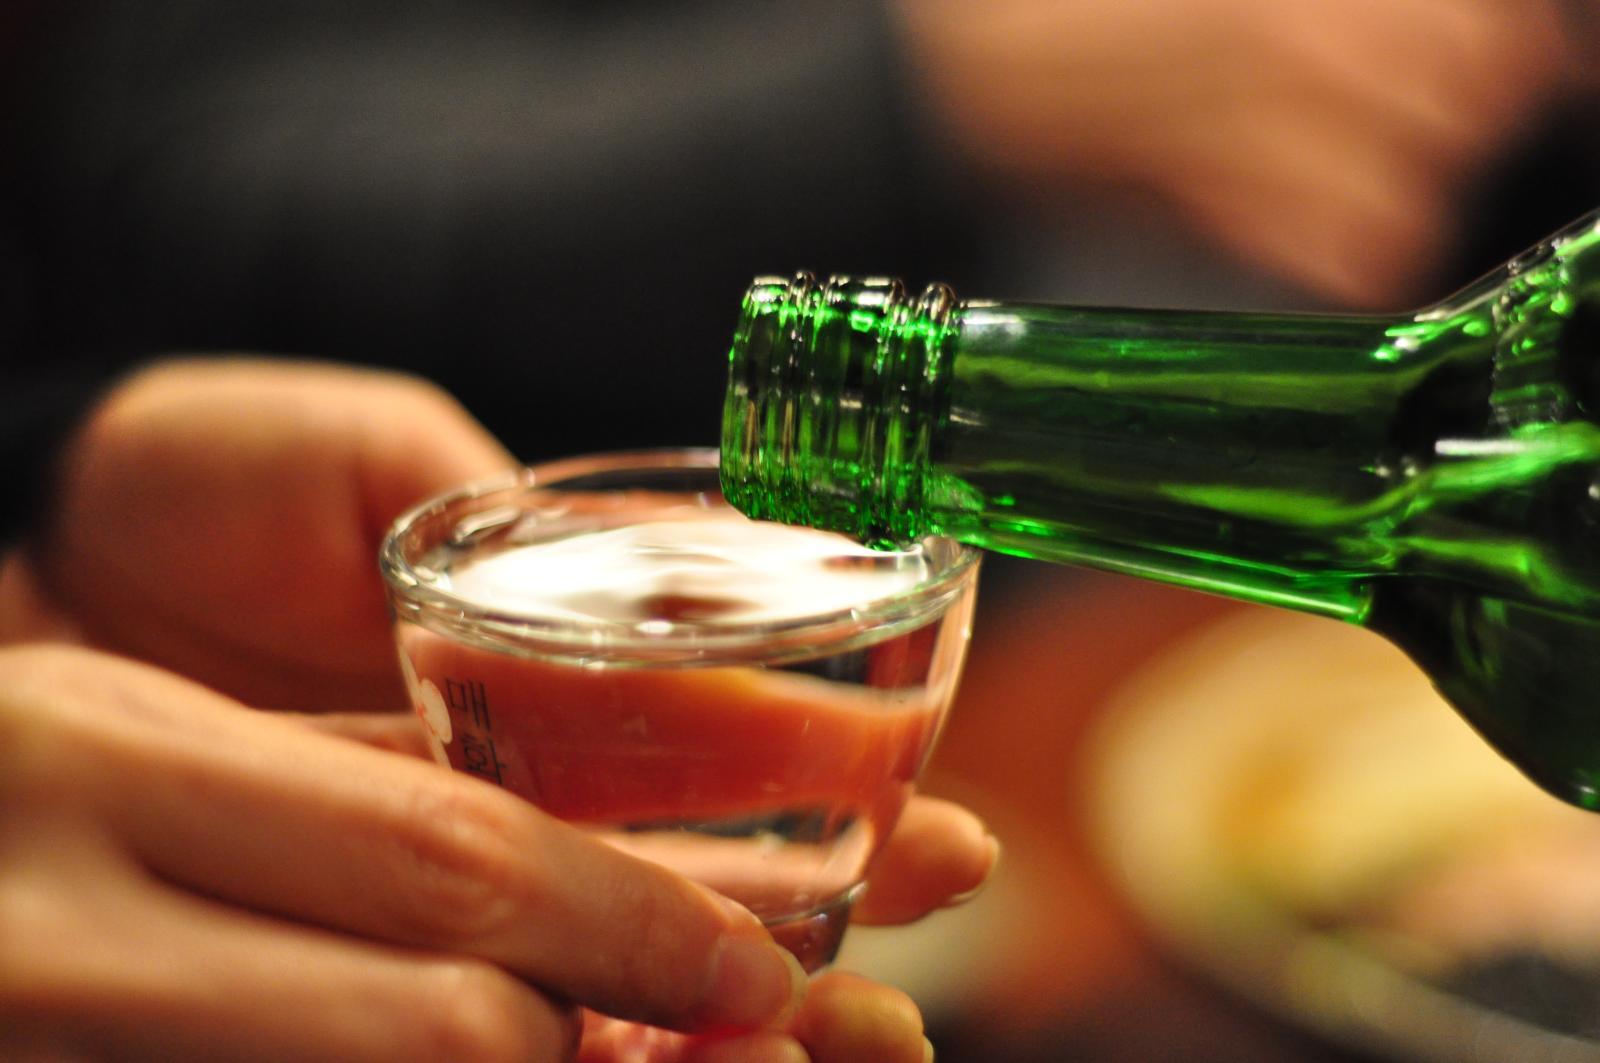 Two die after consuming spurious liquor in Uttarakhand's Tehri district